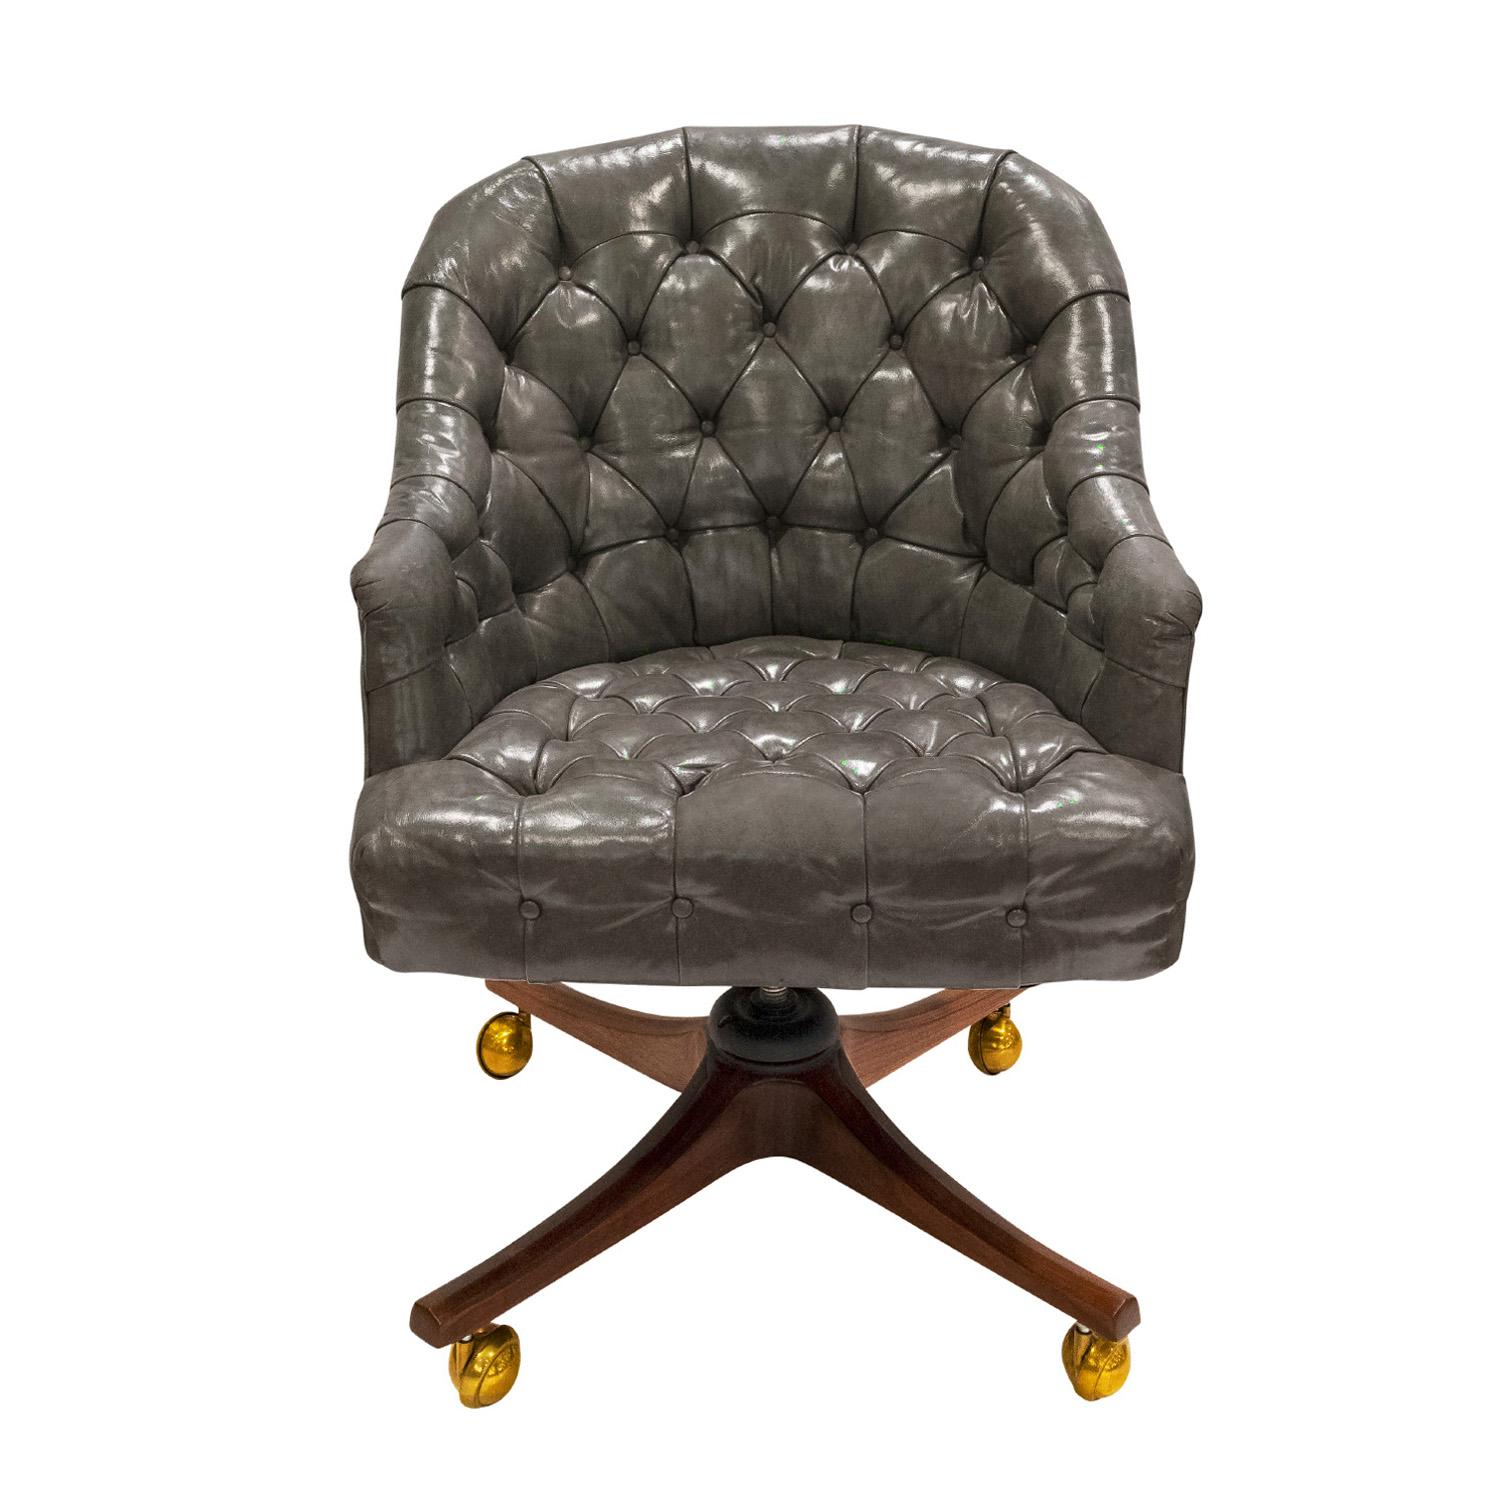 Beautifully made “Barrel Tufted Desk Chair”  model no 5400 with original gray leather on a mahogany base with brass castors by Edward Wormley for Dunbar, American, 1954 (signed “DUNBAR - Berne Indiana” on original metal label on bottom of chair). 